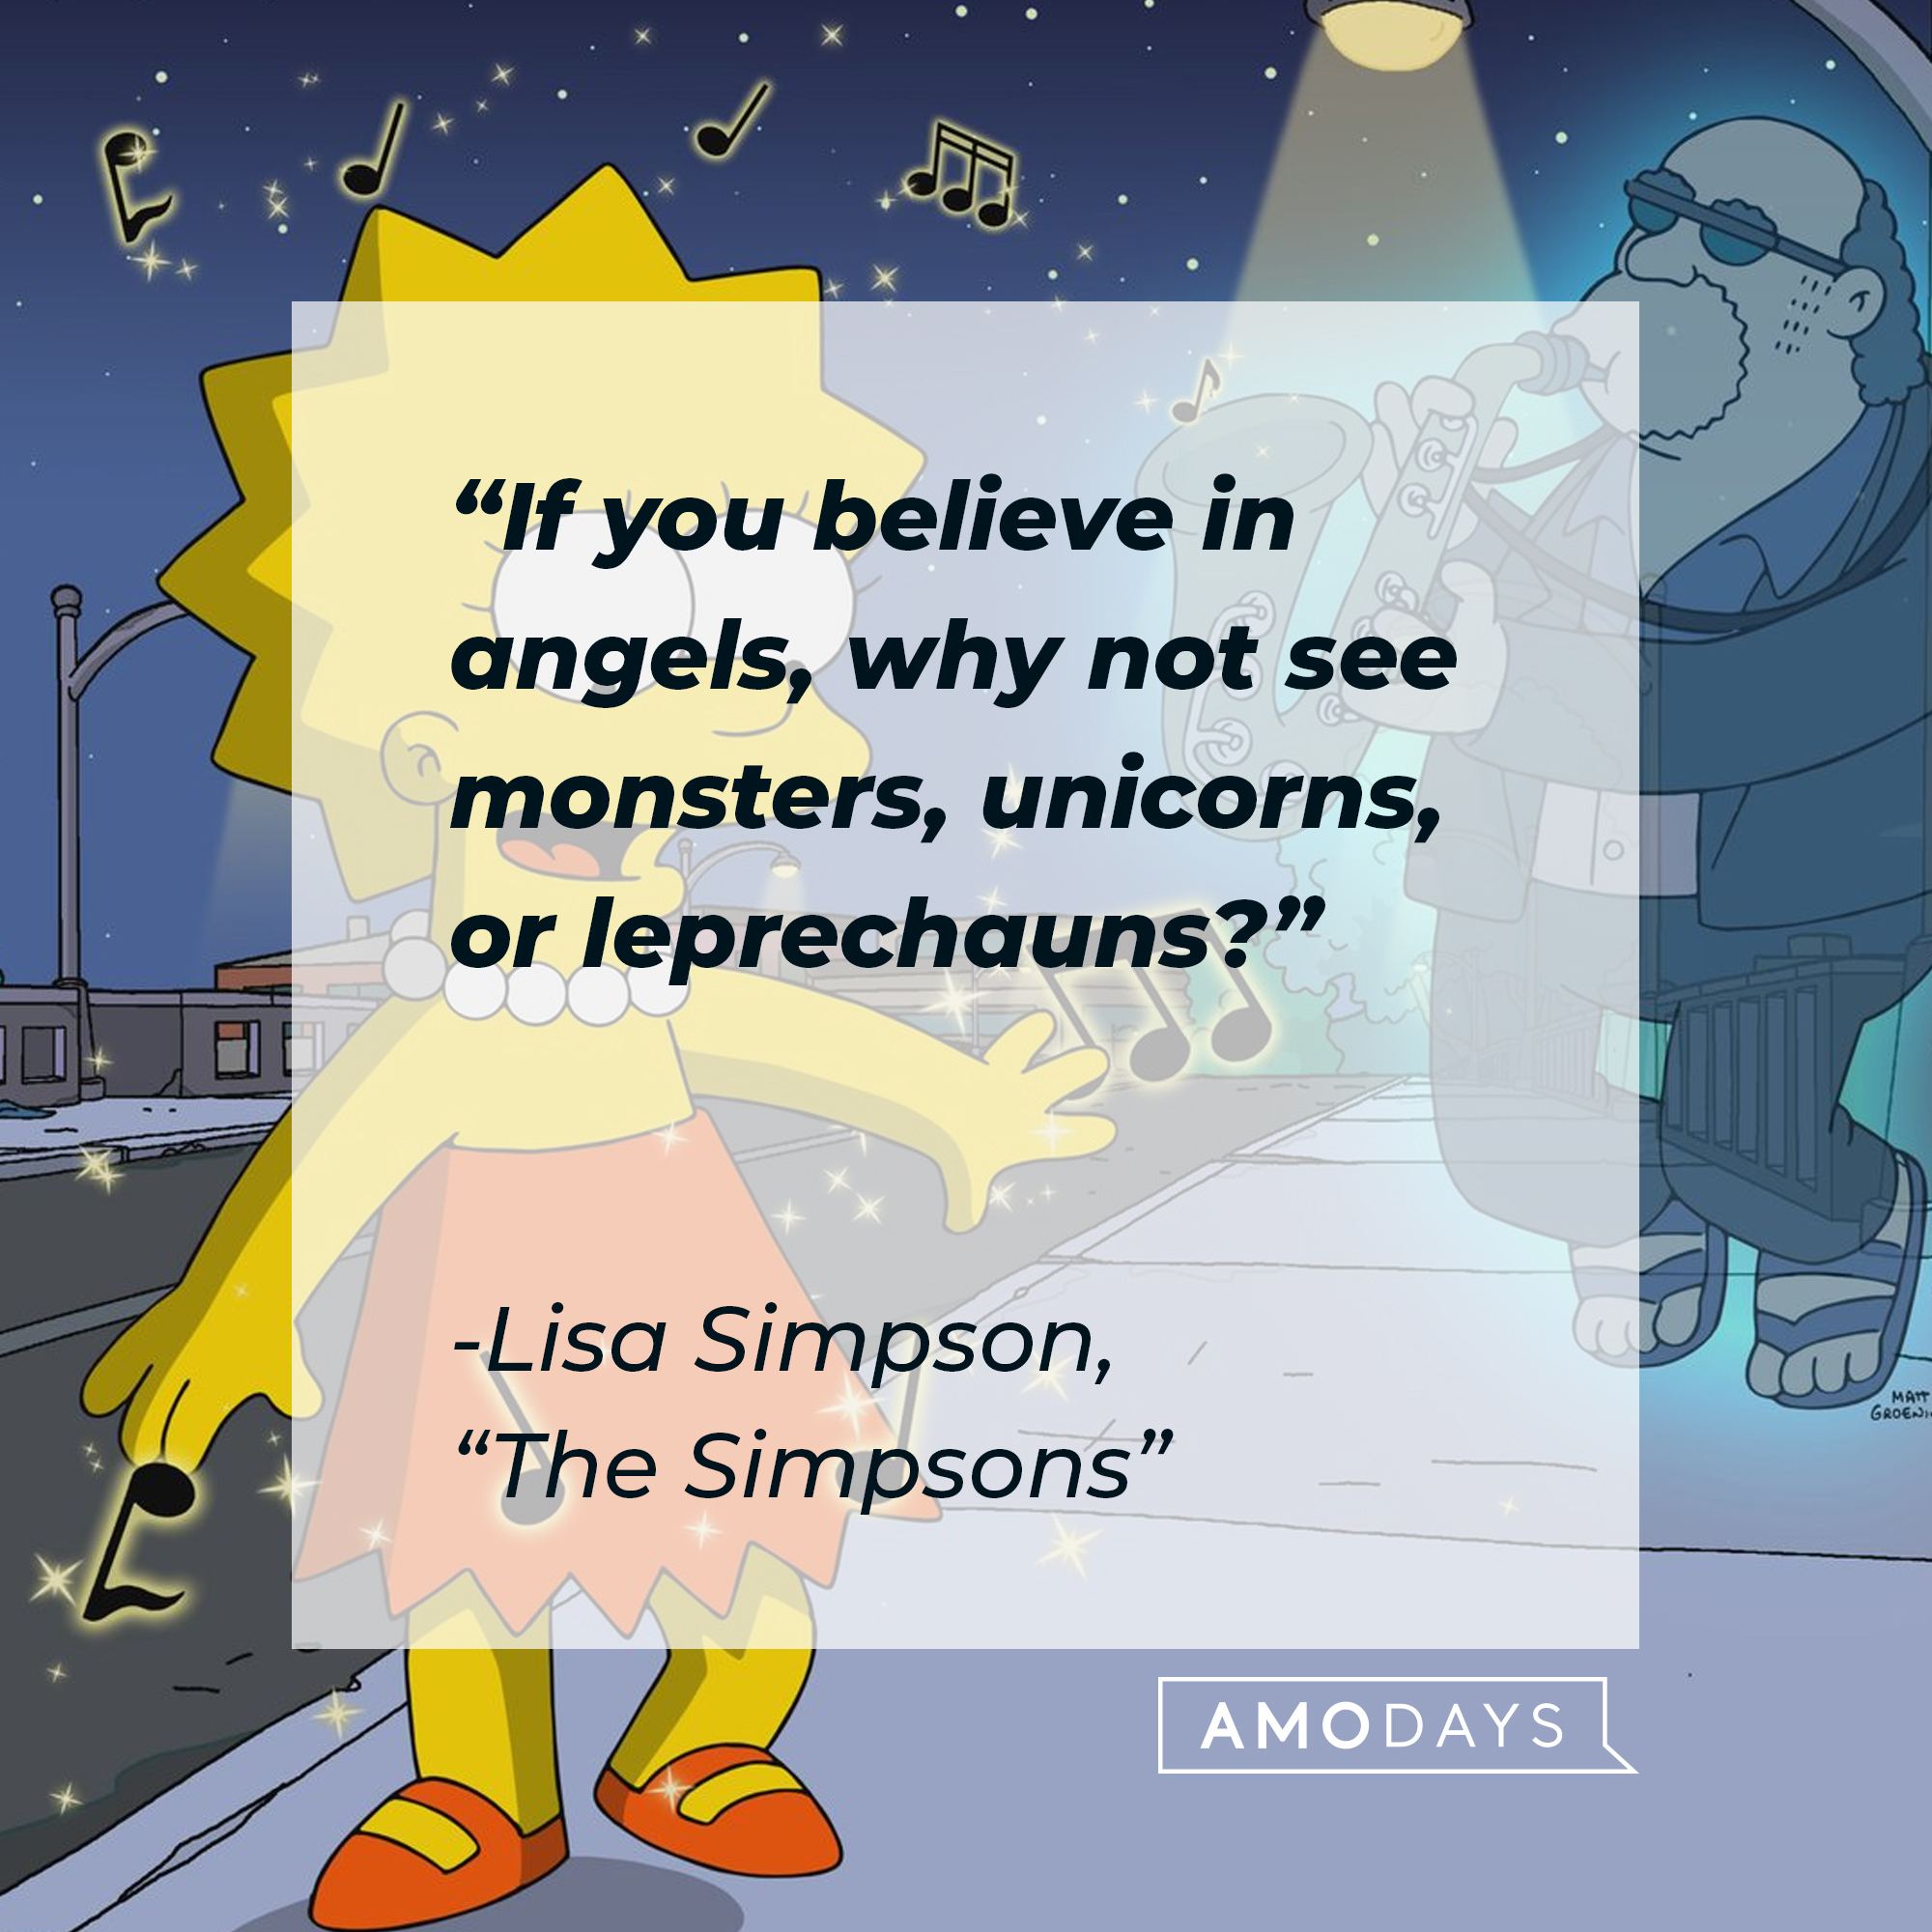 Lisa Simpson with her quote: "If you believe in angels, why not see monsters, unicorns, or leprechauns?" | Source: Facebook.com/TheSimpsons